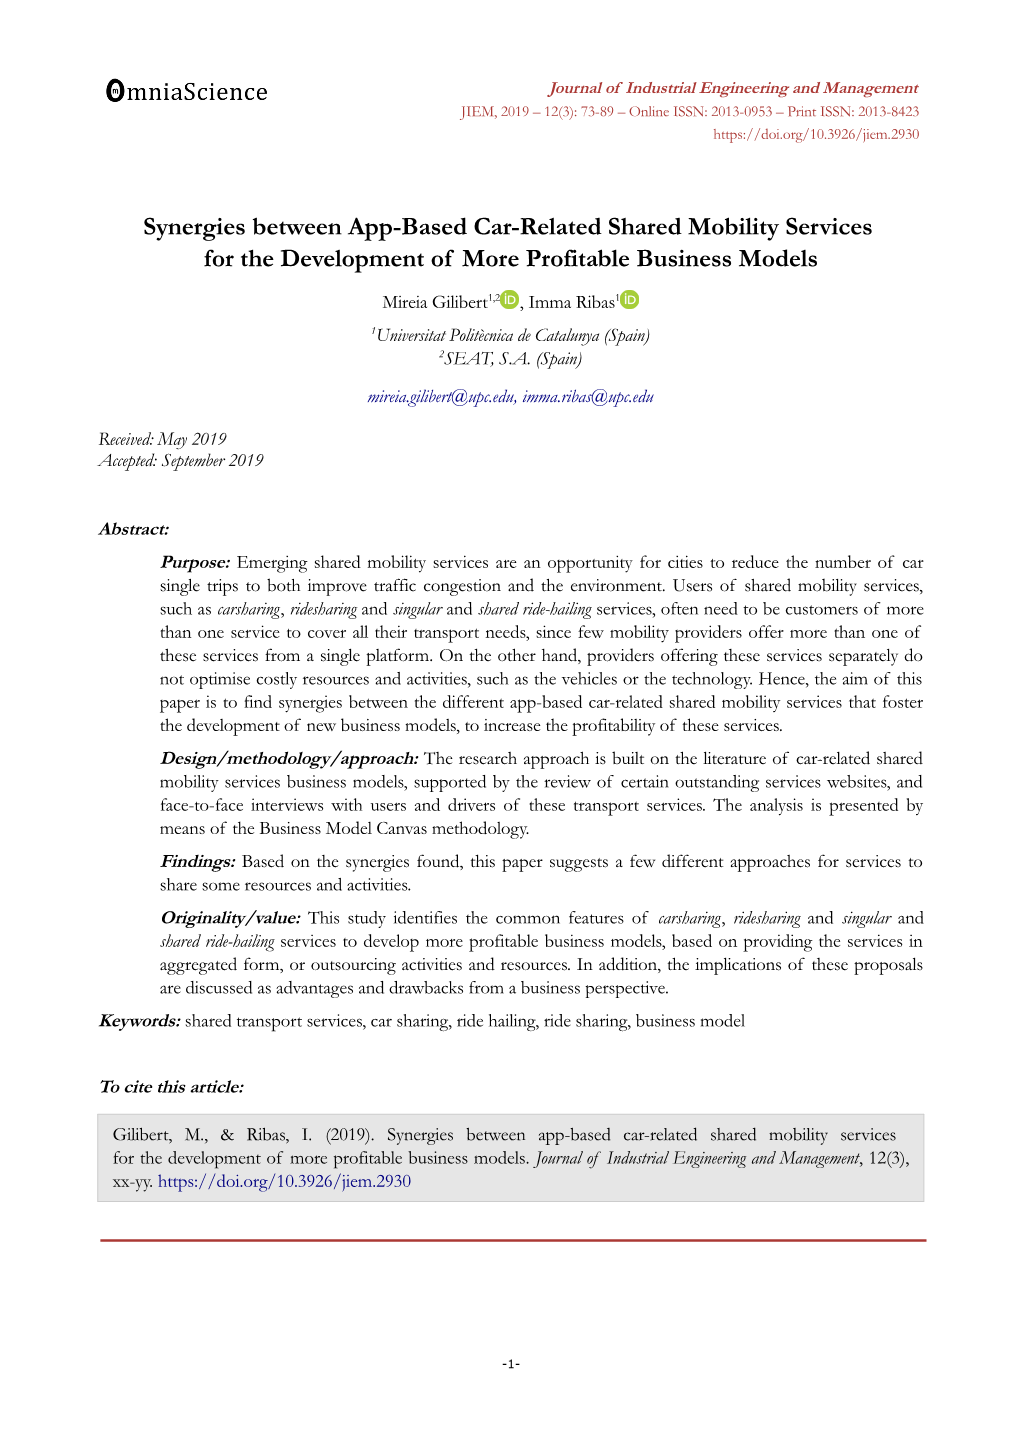 Synergies Between App-Based Car-Related Shared Mobility Services for the Development of More Profitable Business Models